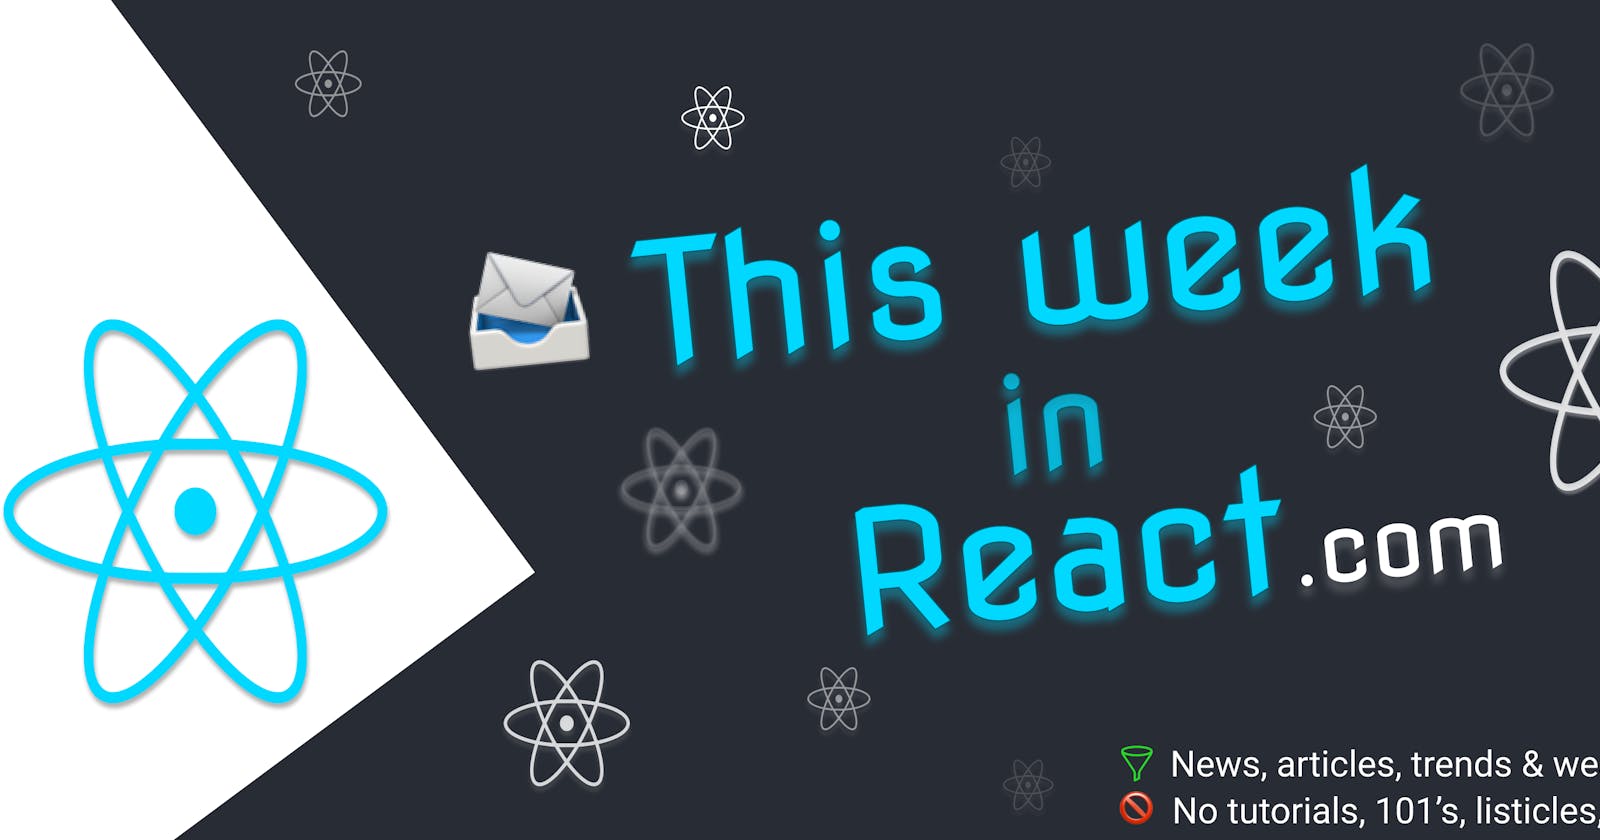 This Week In React #133: Astro, React dying?, Qwikify, CRA, Next.js, Remix, Redux, Storybook, Redwood, Nextra, React-Native...